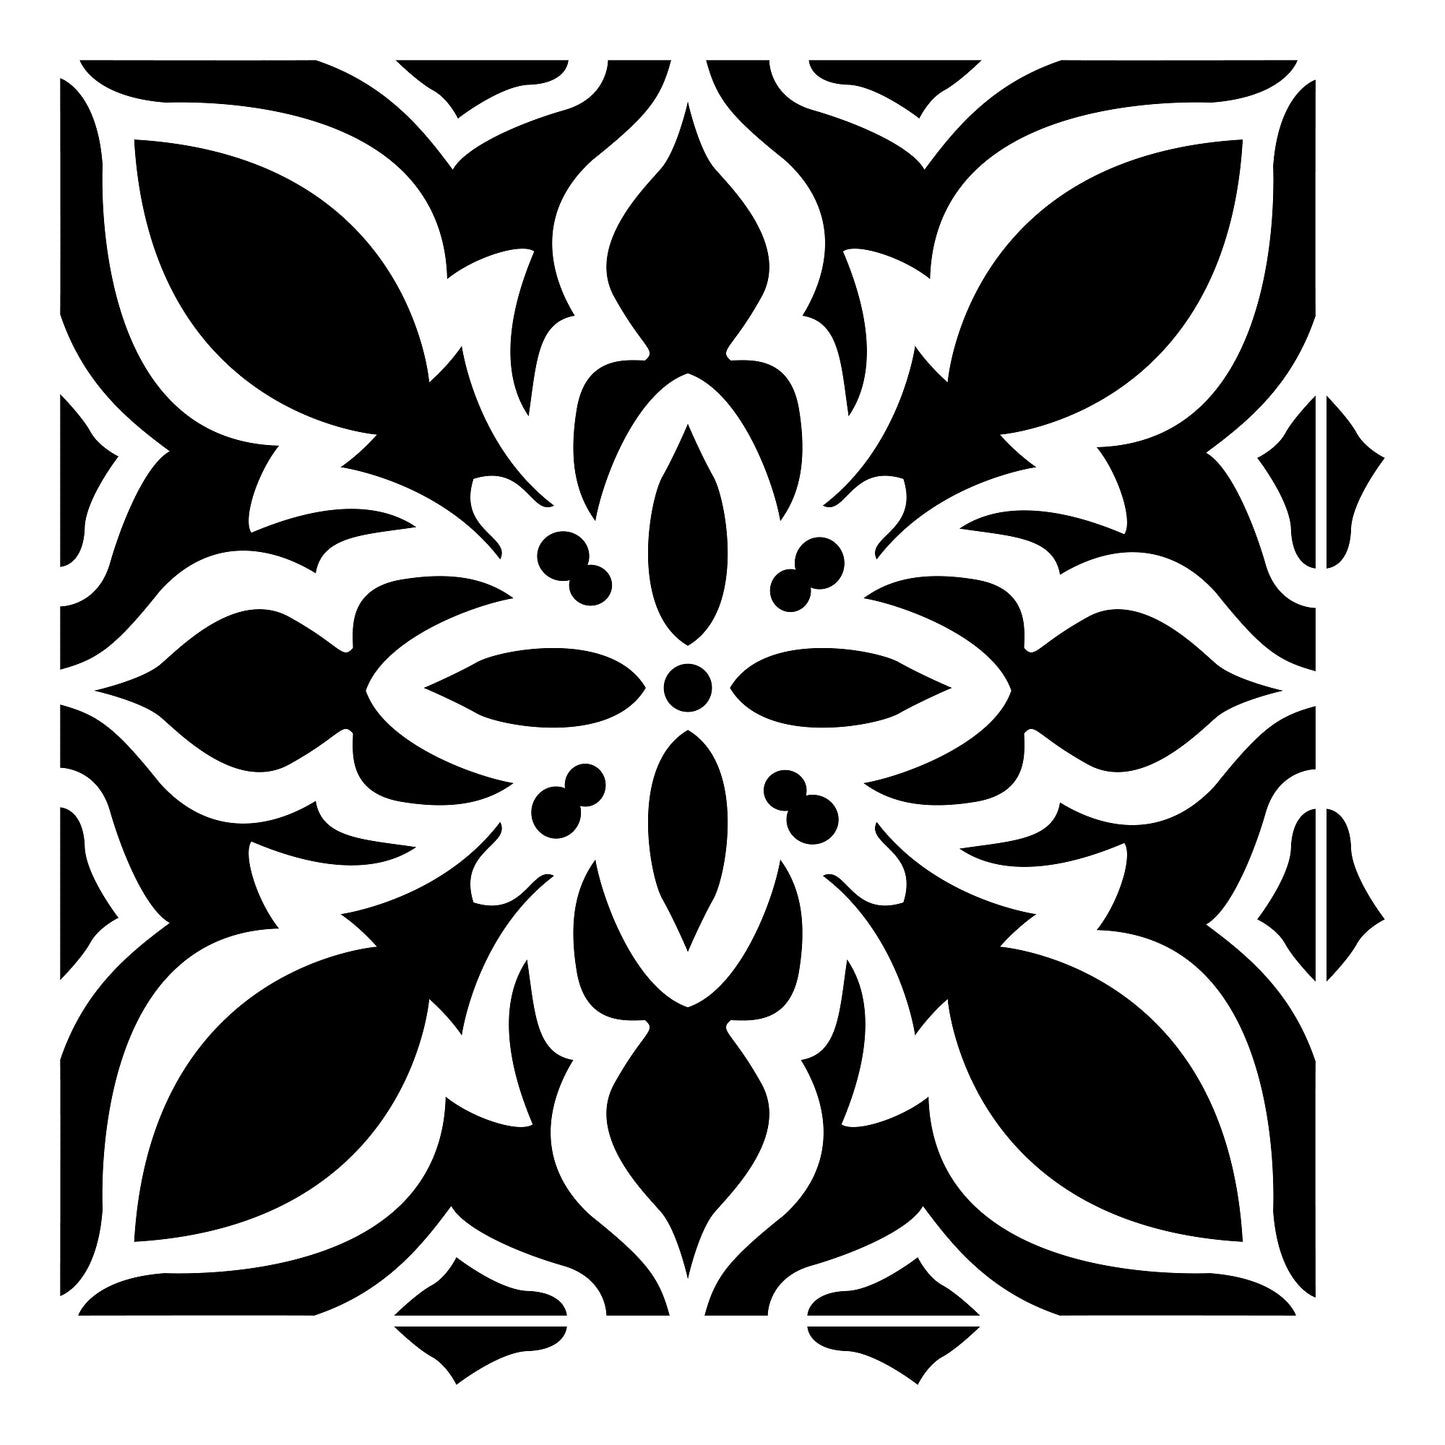 Quadro Tile Design Stencils for Wall Painting (KDMD1401)